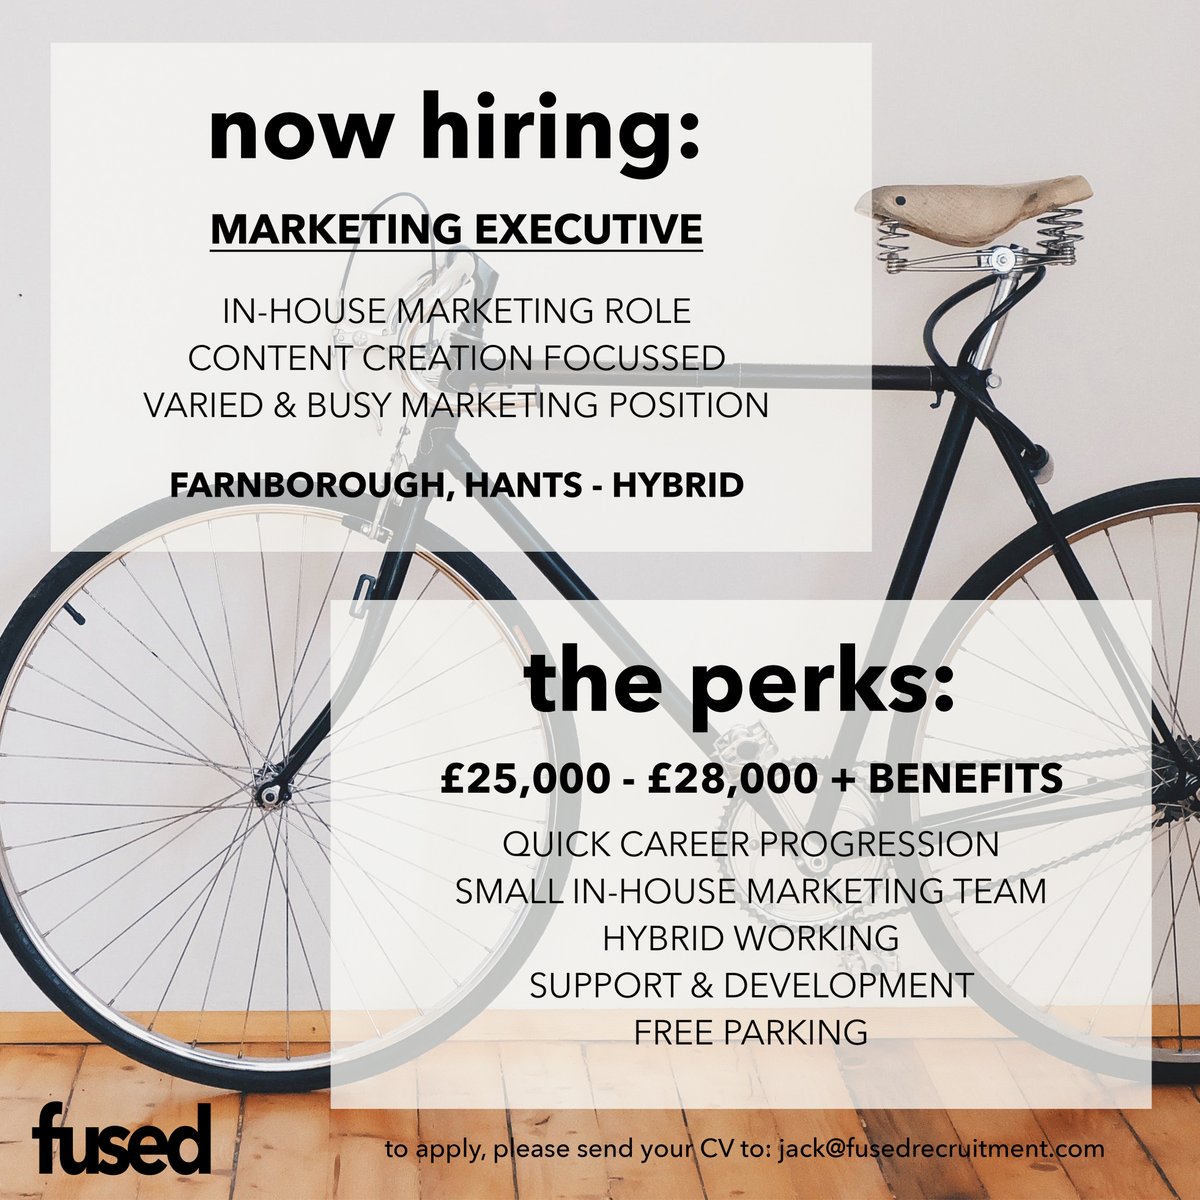 NEW MARKETING VACANCY: We're recruiting for a Marketing Executive to join our client in Farnborough, Hampshire - a growing, SaaS business. #hiring #marketingjobs #farnborough #recruiting #farnboroughjobs